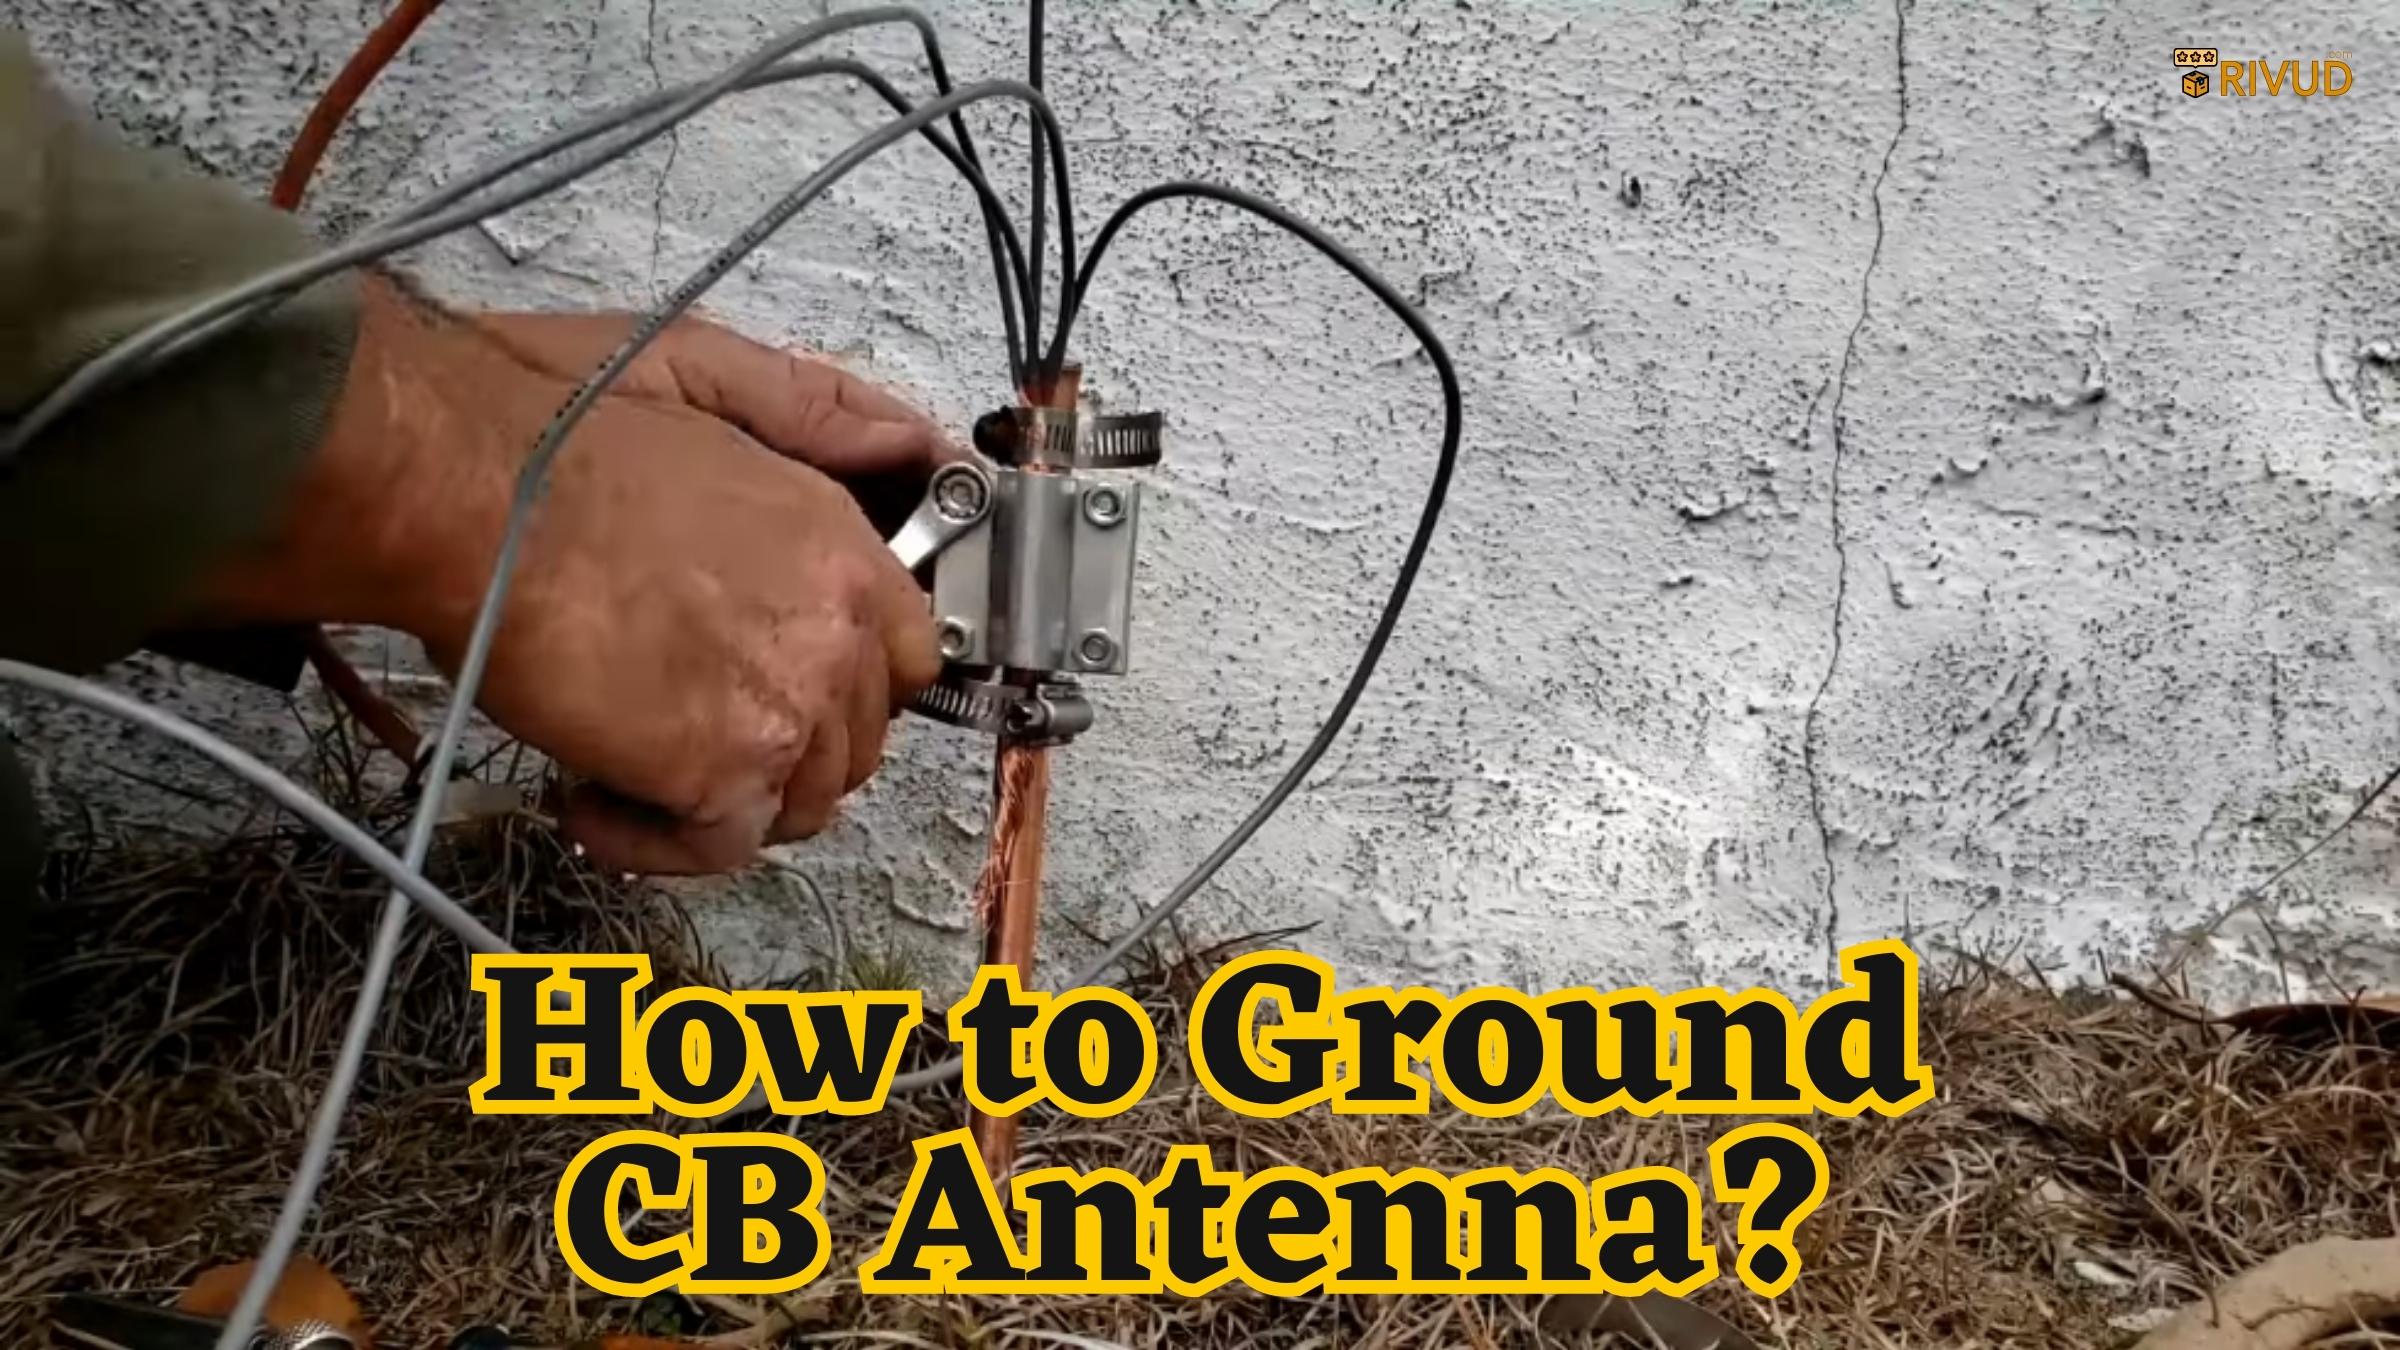 How To Ground Your Cb Antenna?